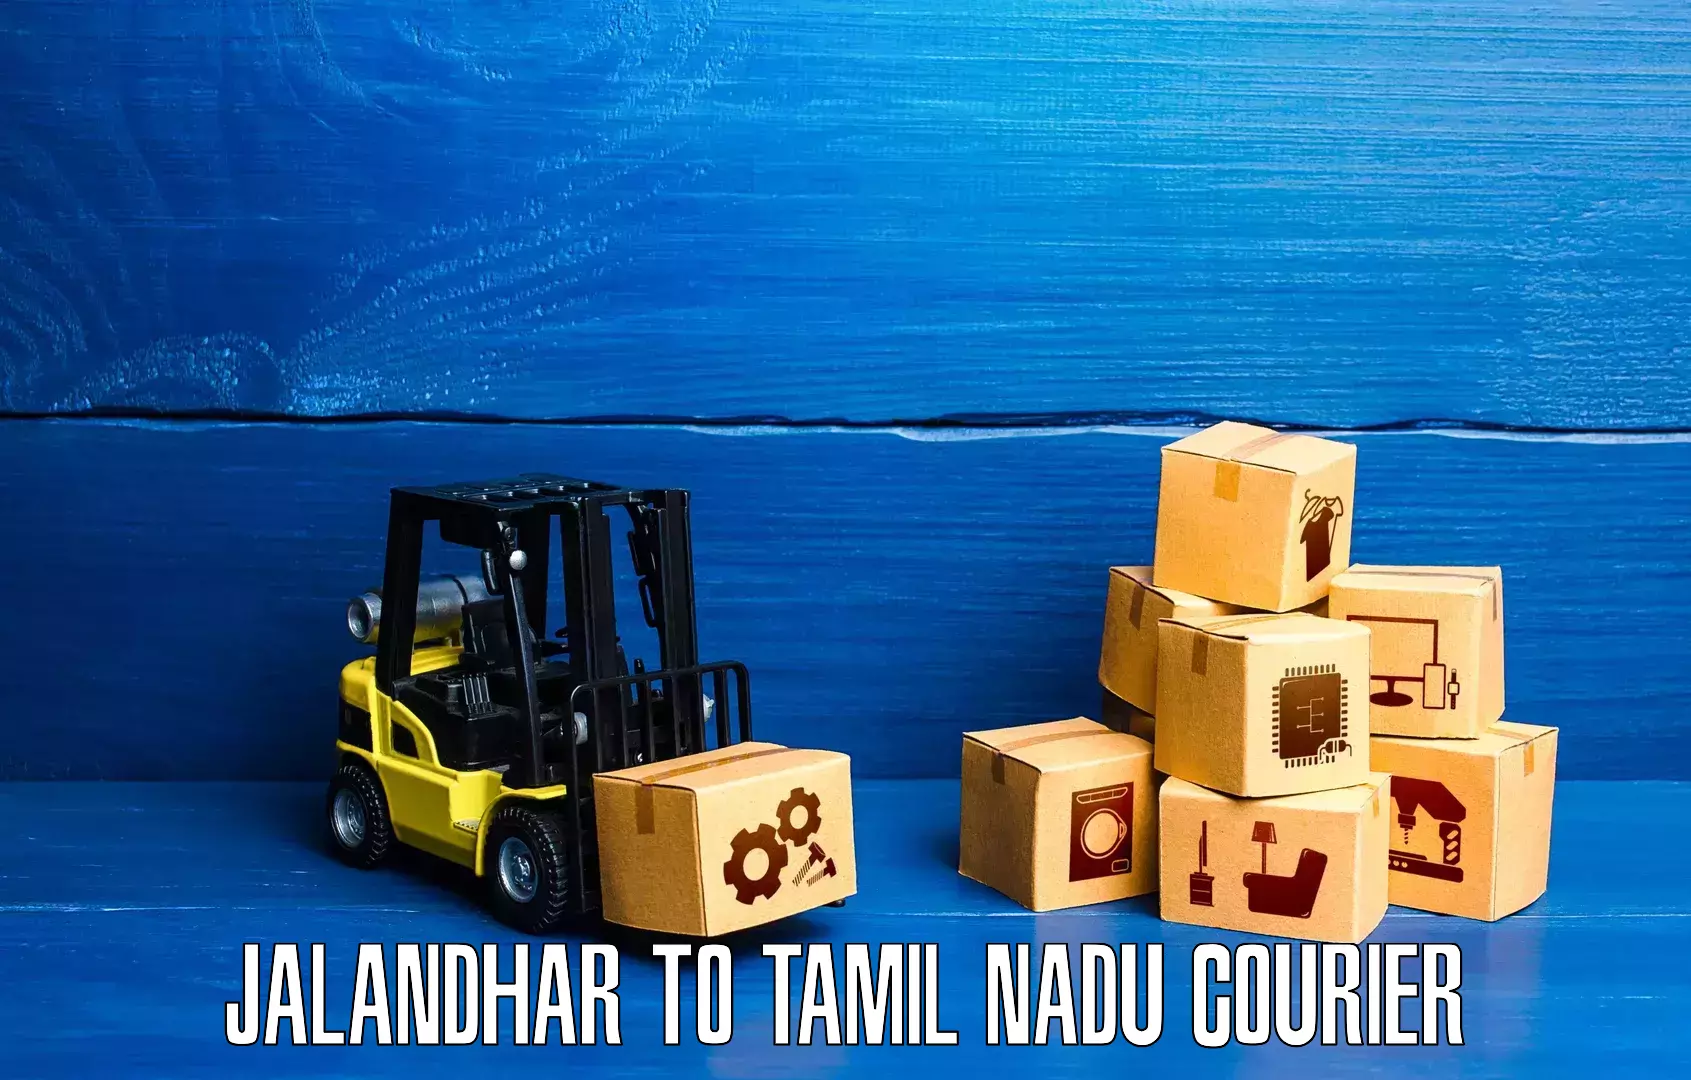 Flexible delivery schedules Jalandhar to Dindigul